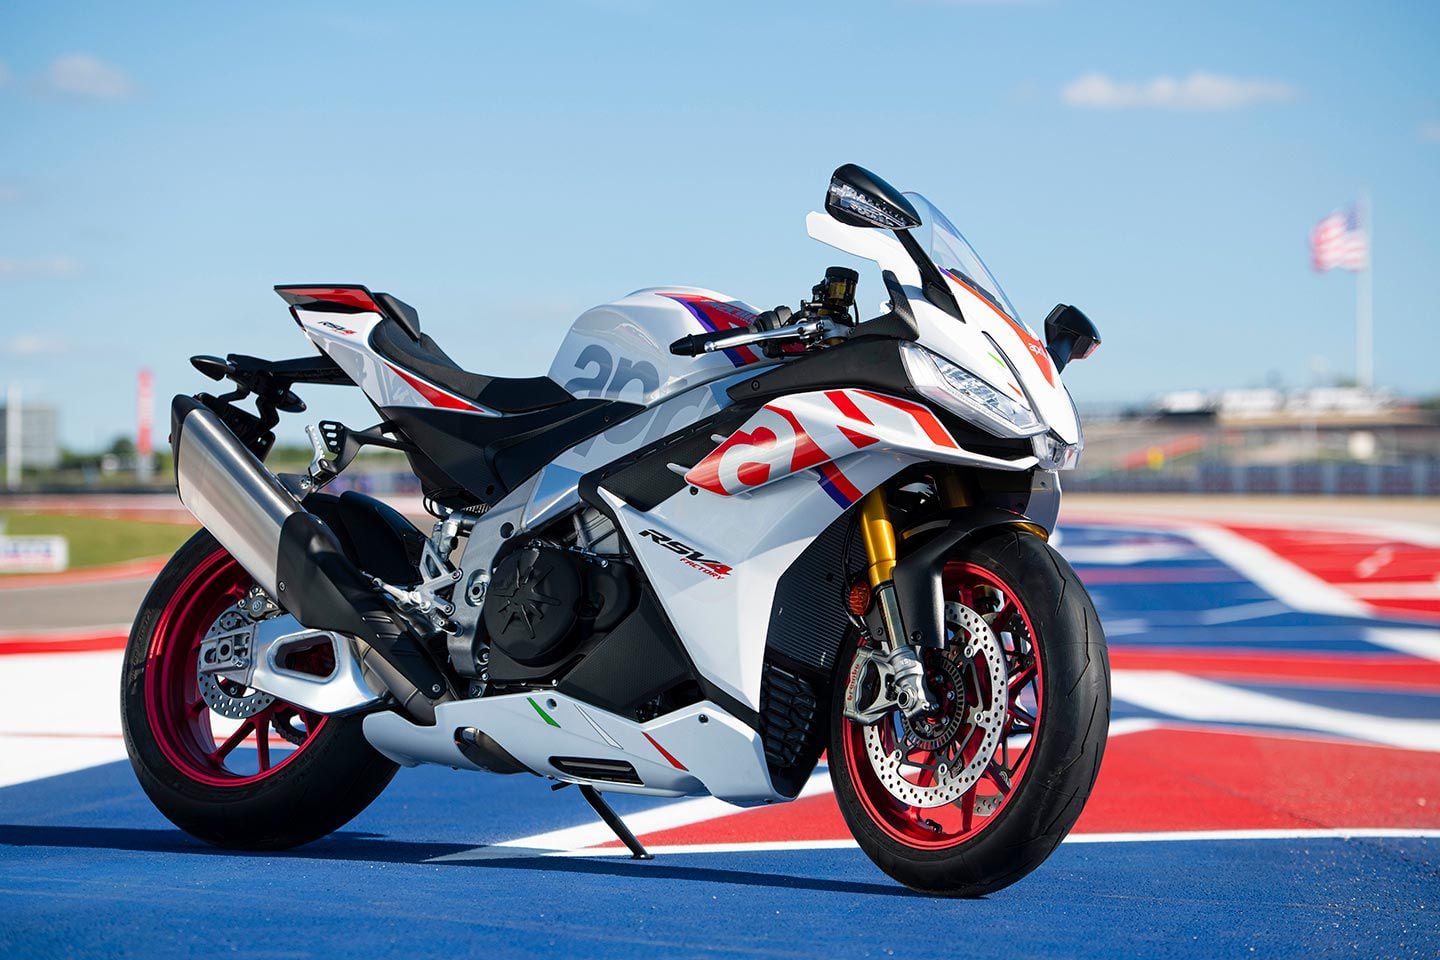 The limited-edition Aprilia RSV4 Factory Special Edition, luxuriating in turn 18 of Austin, Texas’ Circuit of The Americas track.